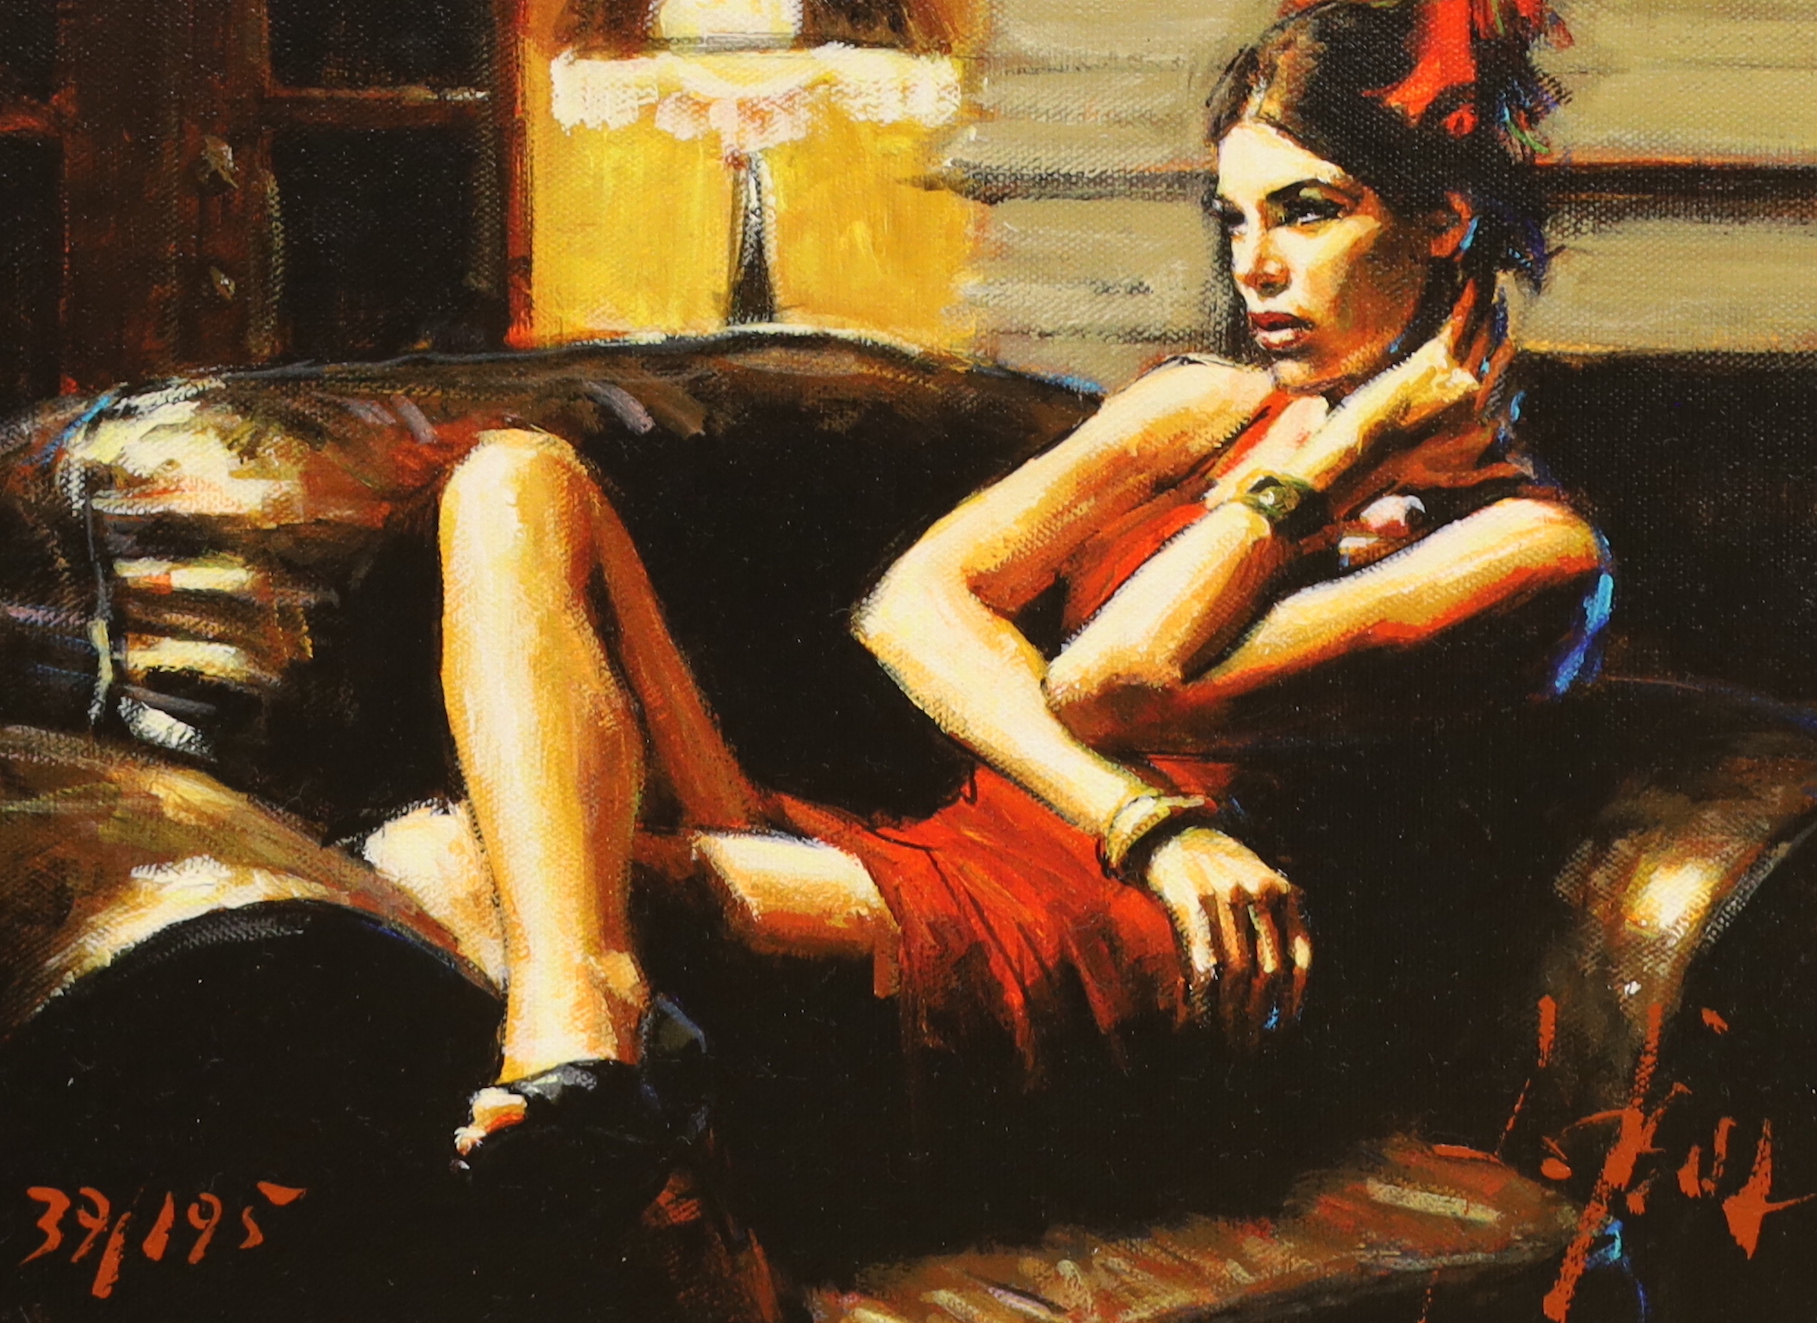 Fabian Perez (Argentinian, b.1967), hand embellished giclee print, 'Linda in red III', limited edition 37/195, COA verso, 21 x 29cm